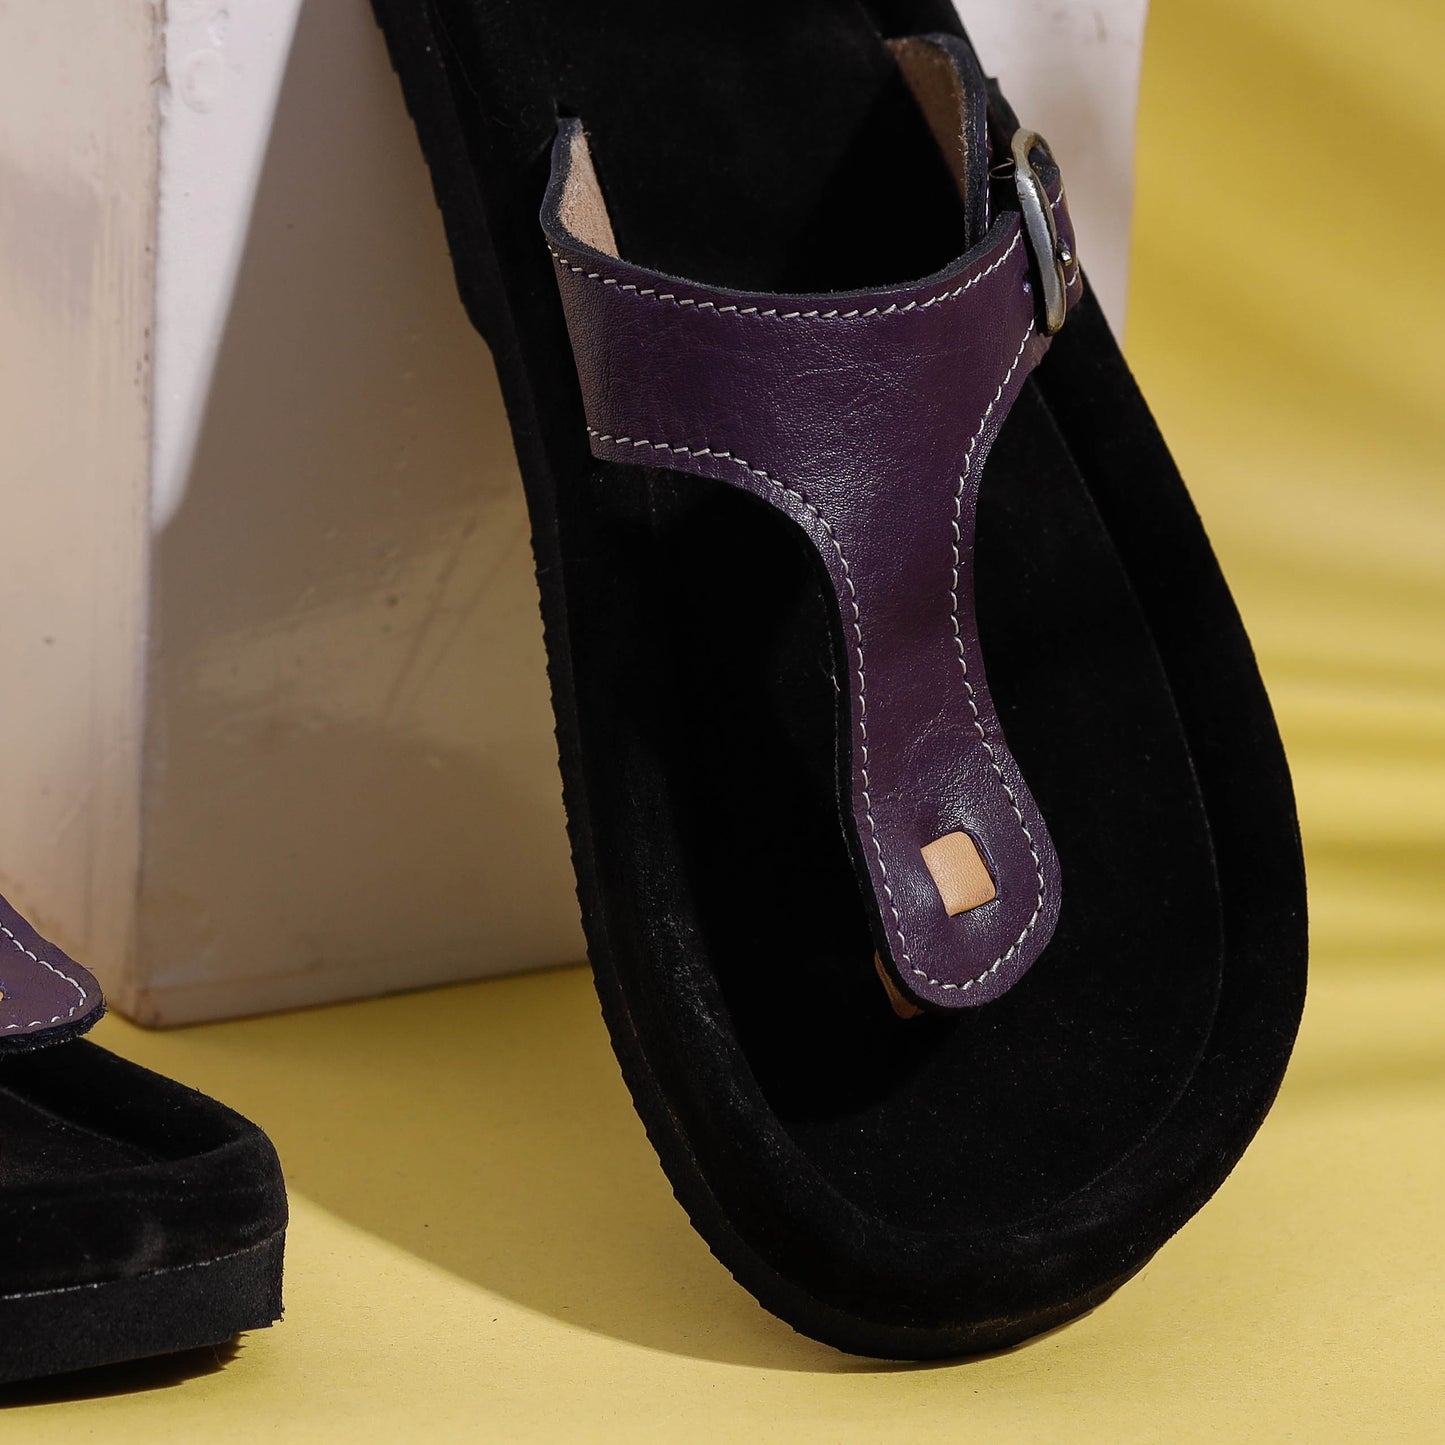 Black & Purple Handcrafted Women's Leather Slippers with Suede